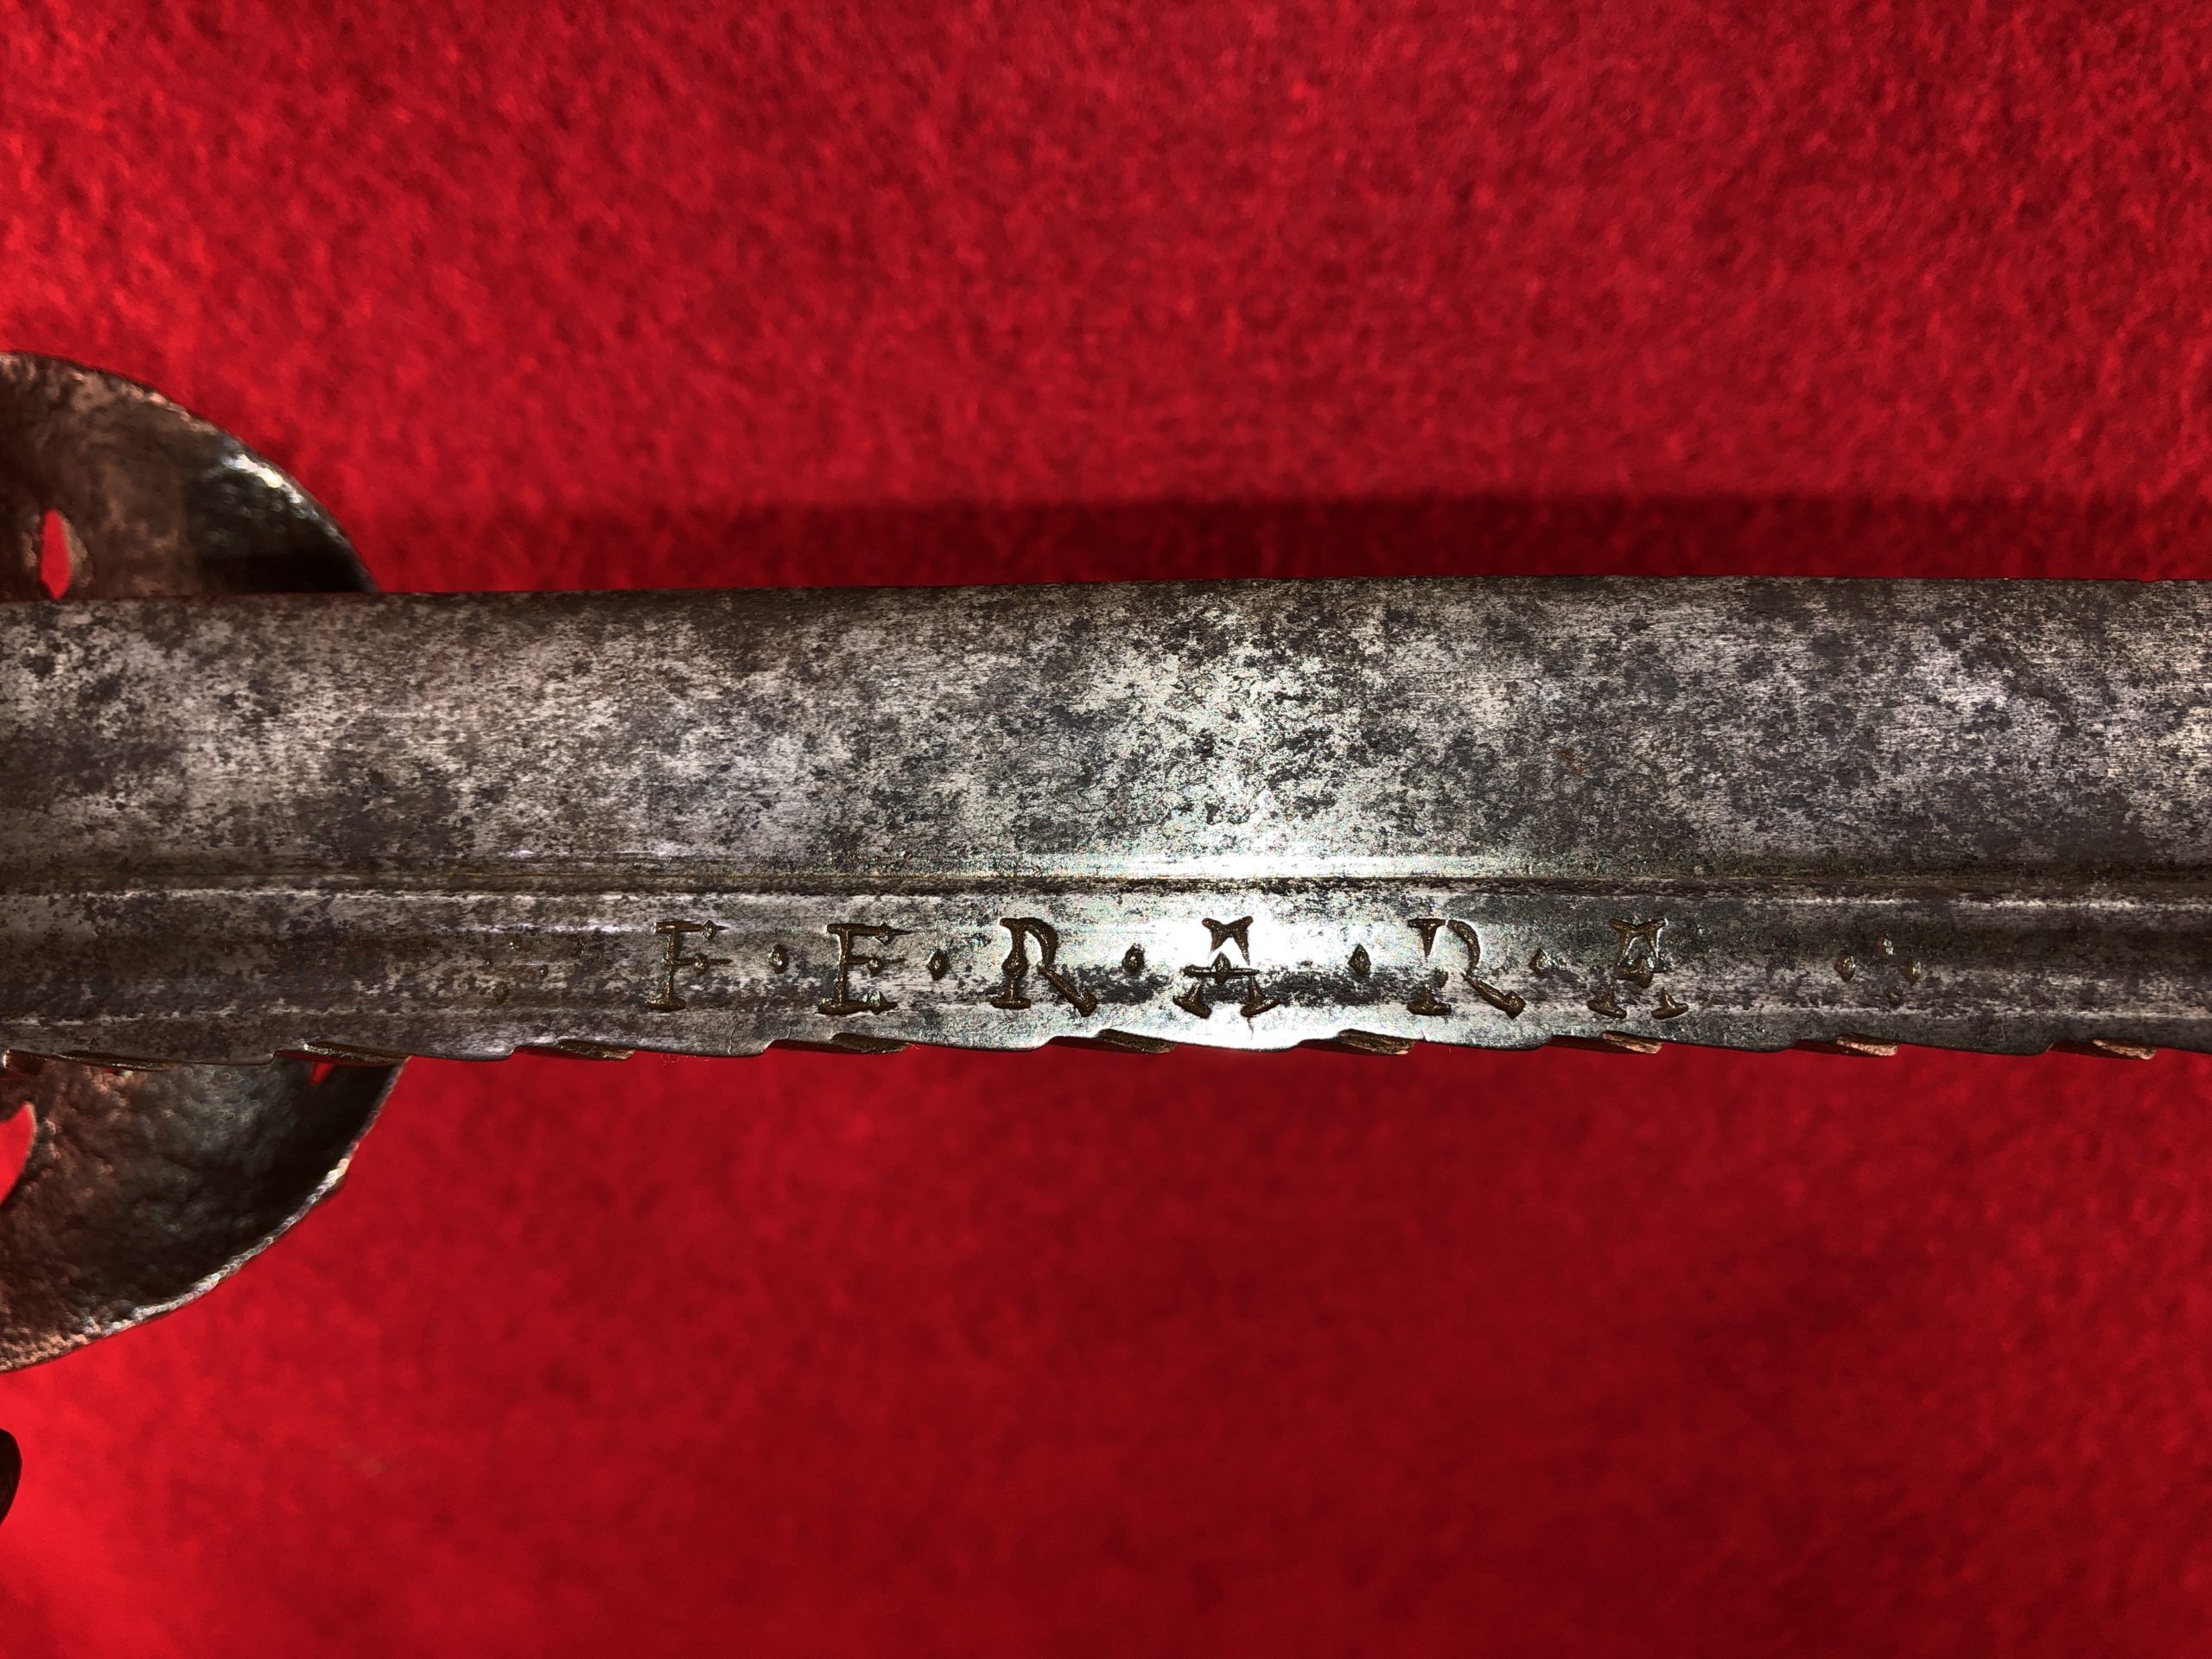 Hounslow Sword 1640-1660 (Sold) - Southern Cross Antique Arms